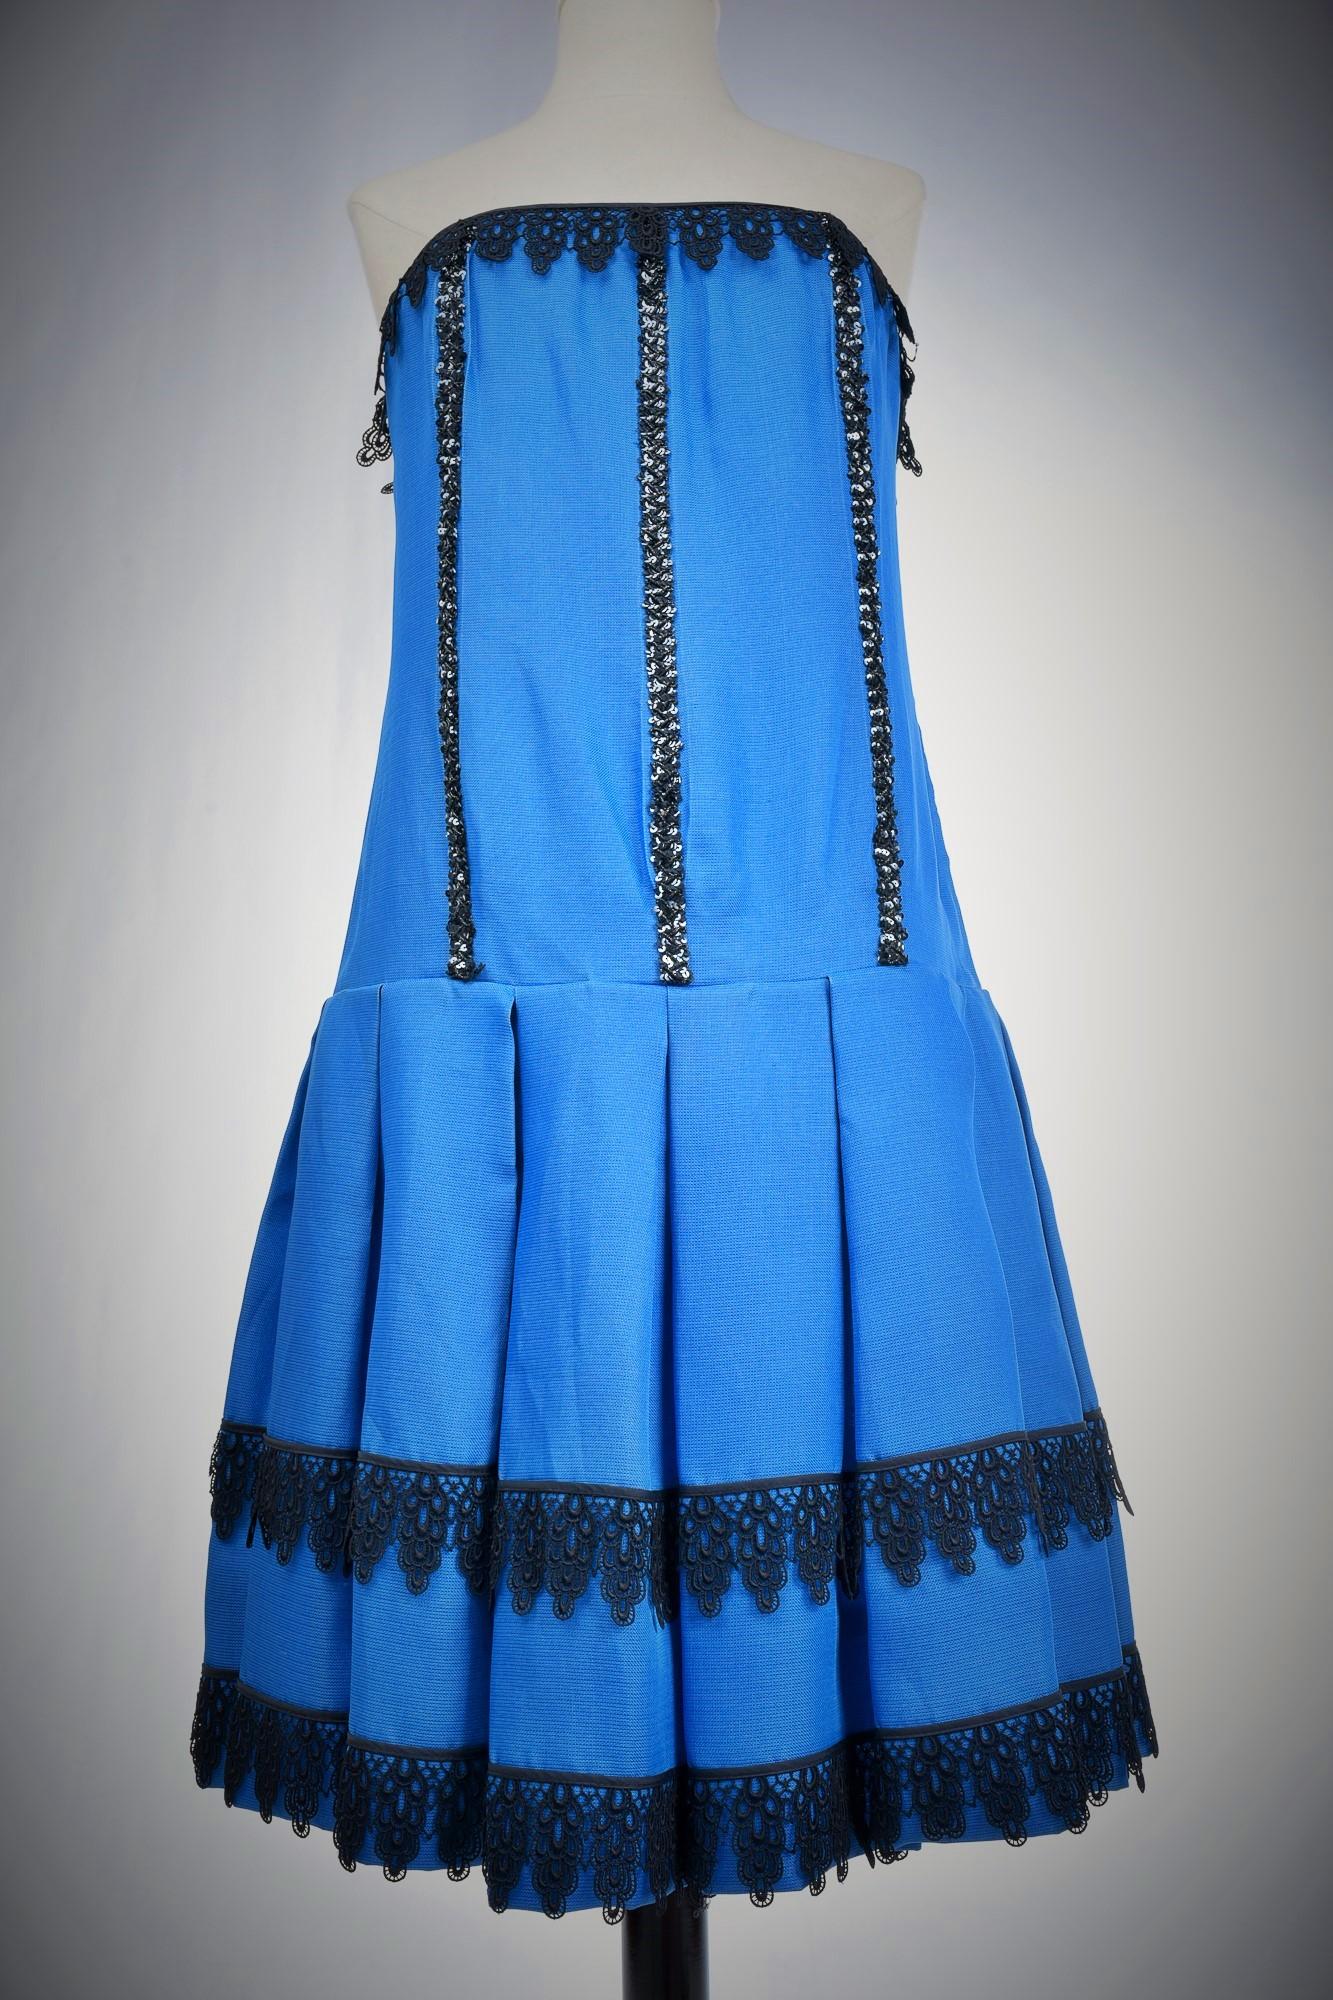 Hubert de Givenchy Cocktail Dress in Gazar Silk and Lace Circa 1968/1970 For Sale 2